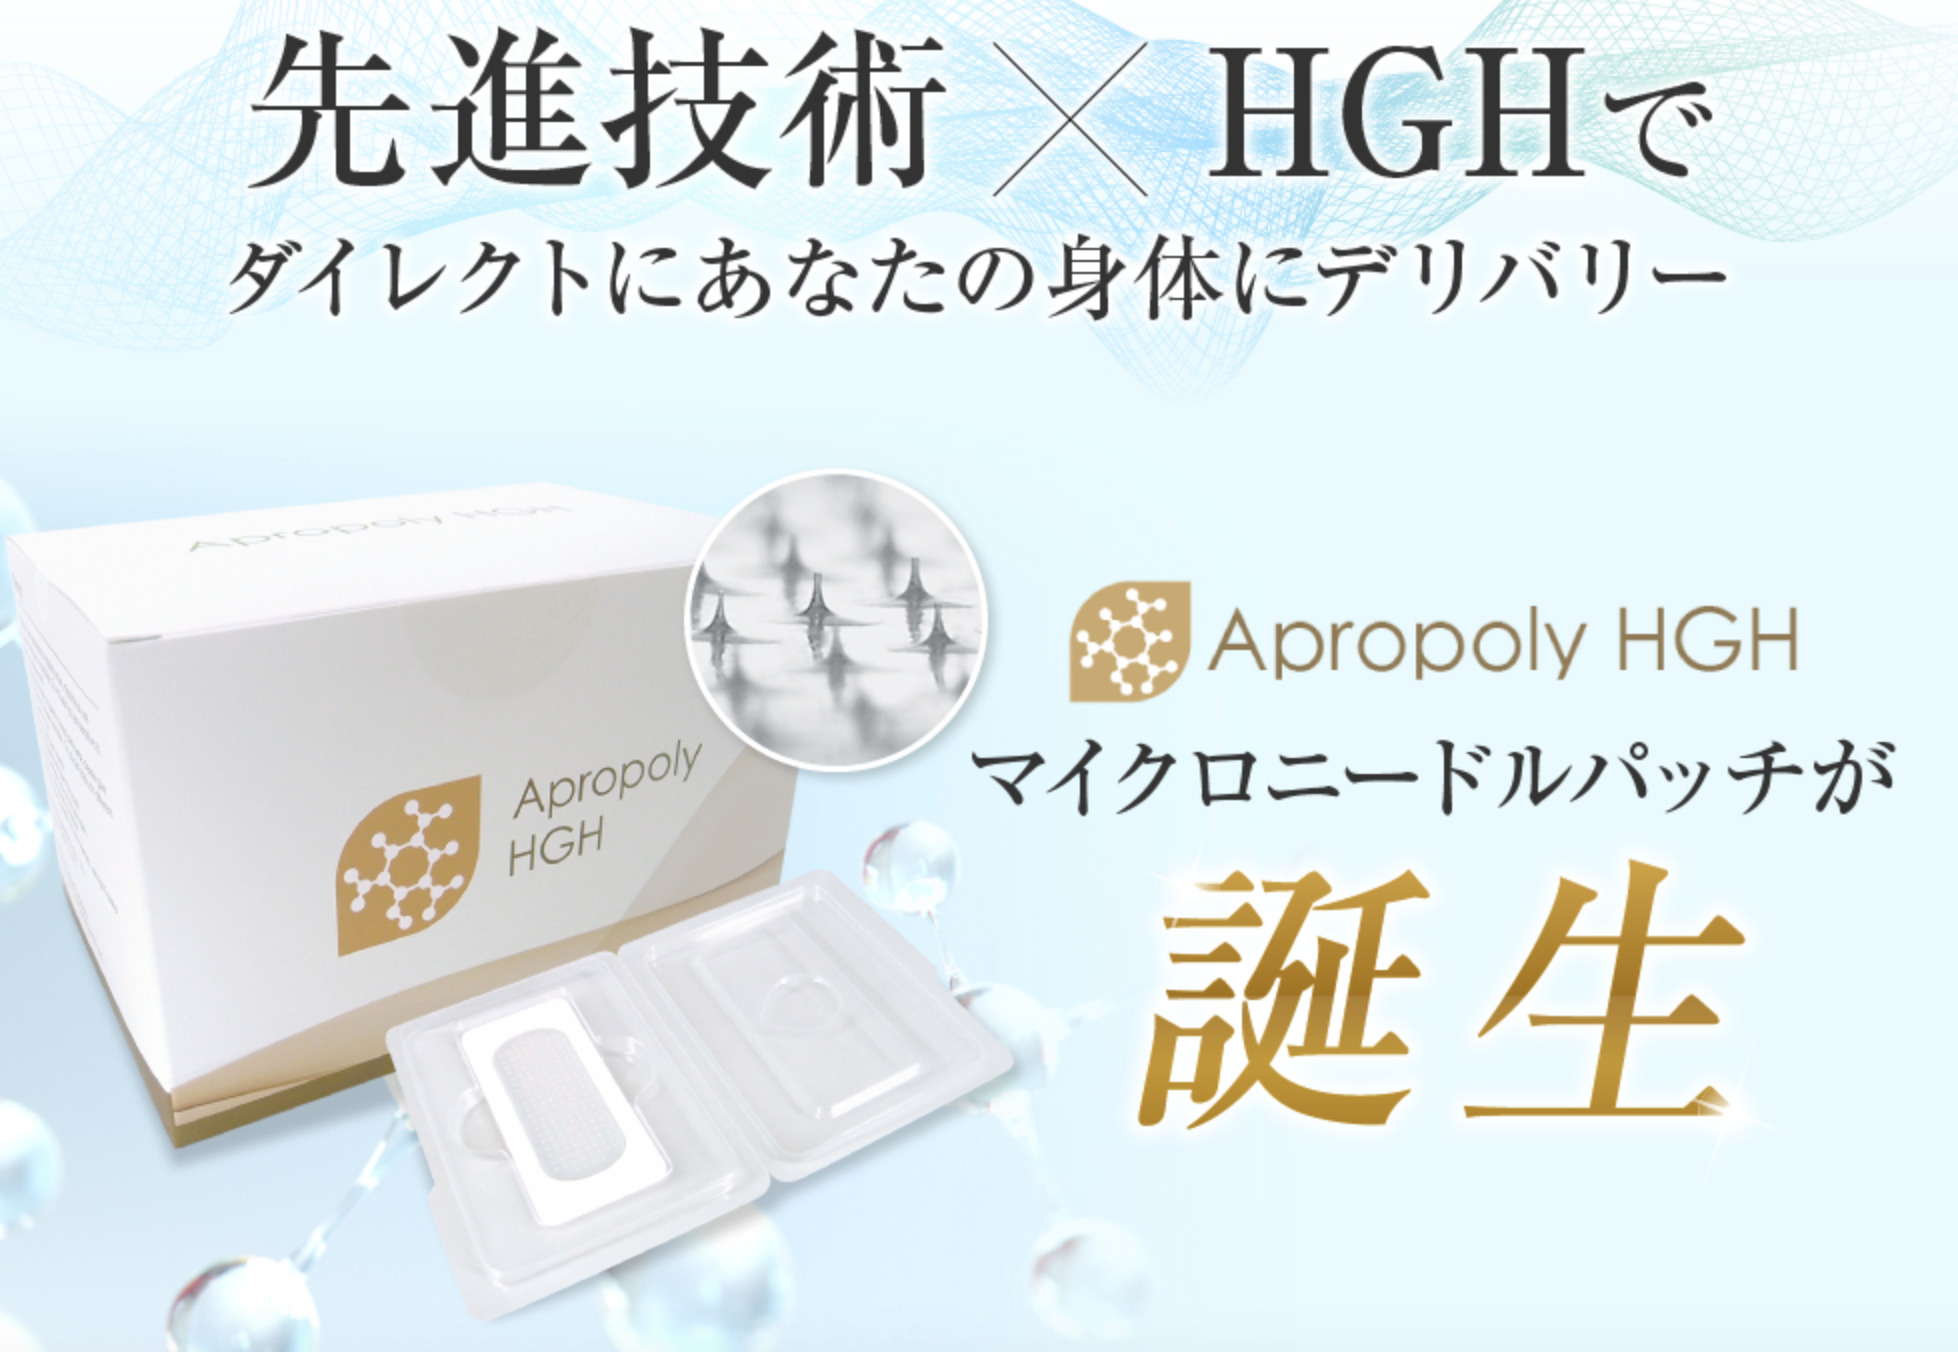 Apropoly HGH マイクロニードルパッチ